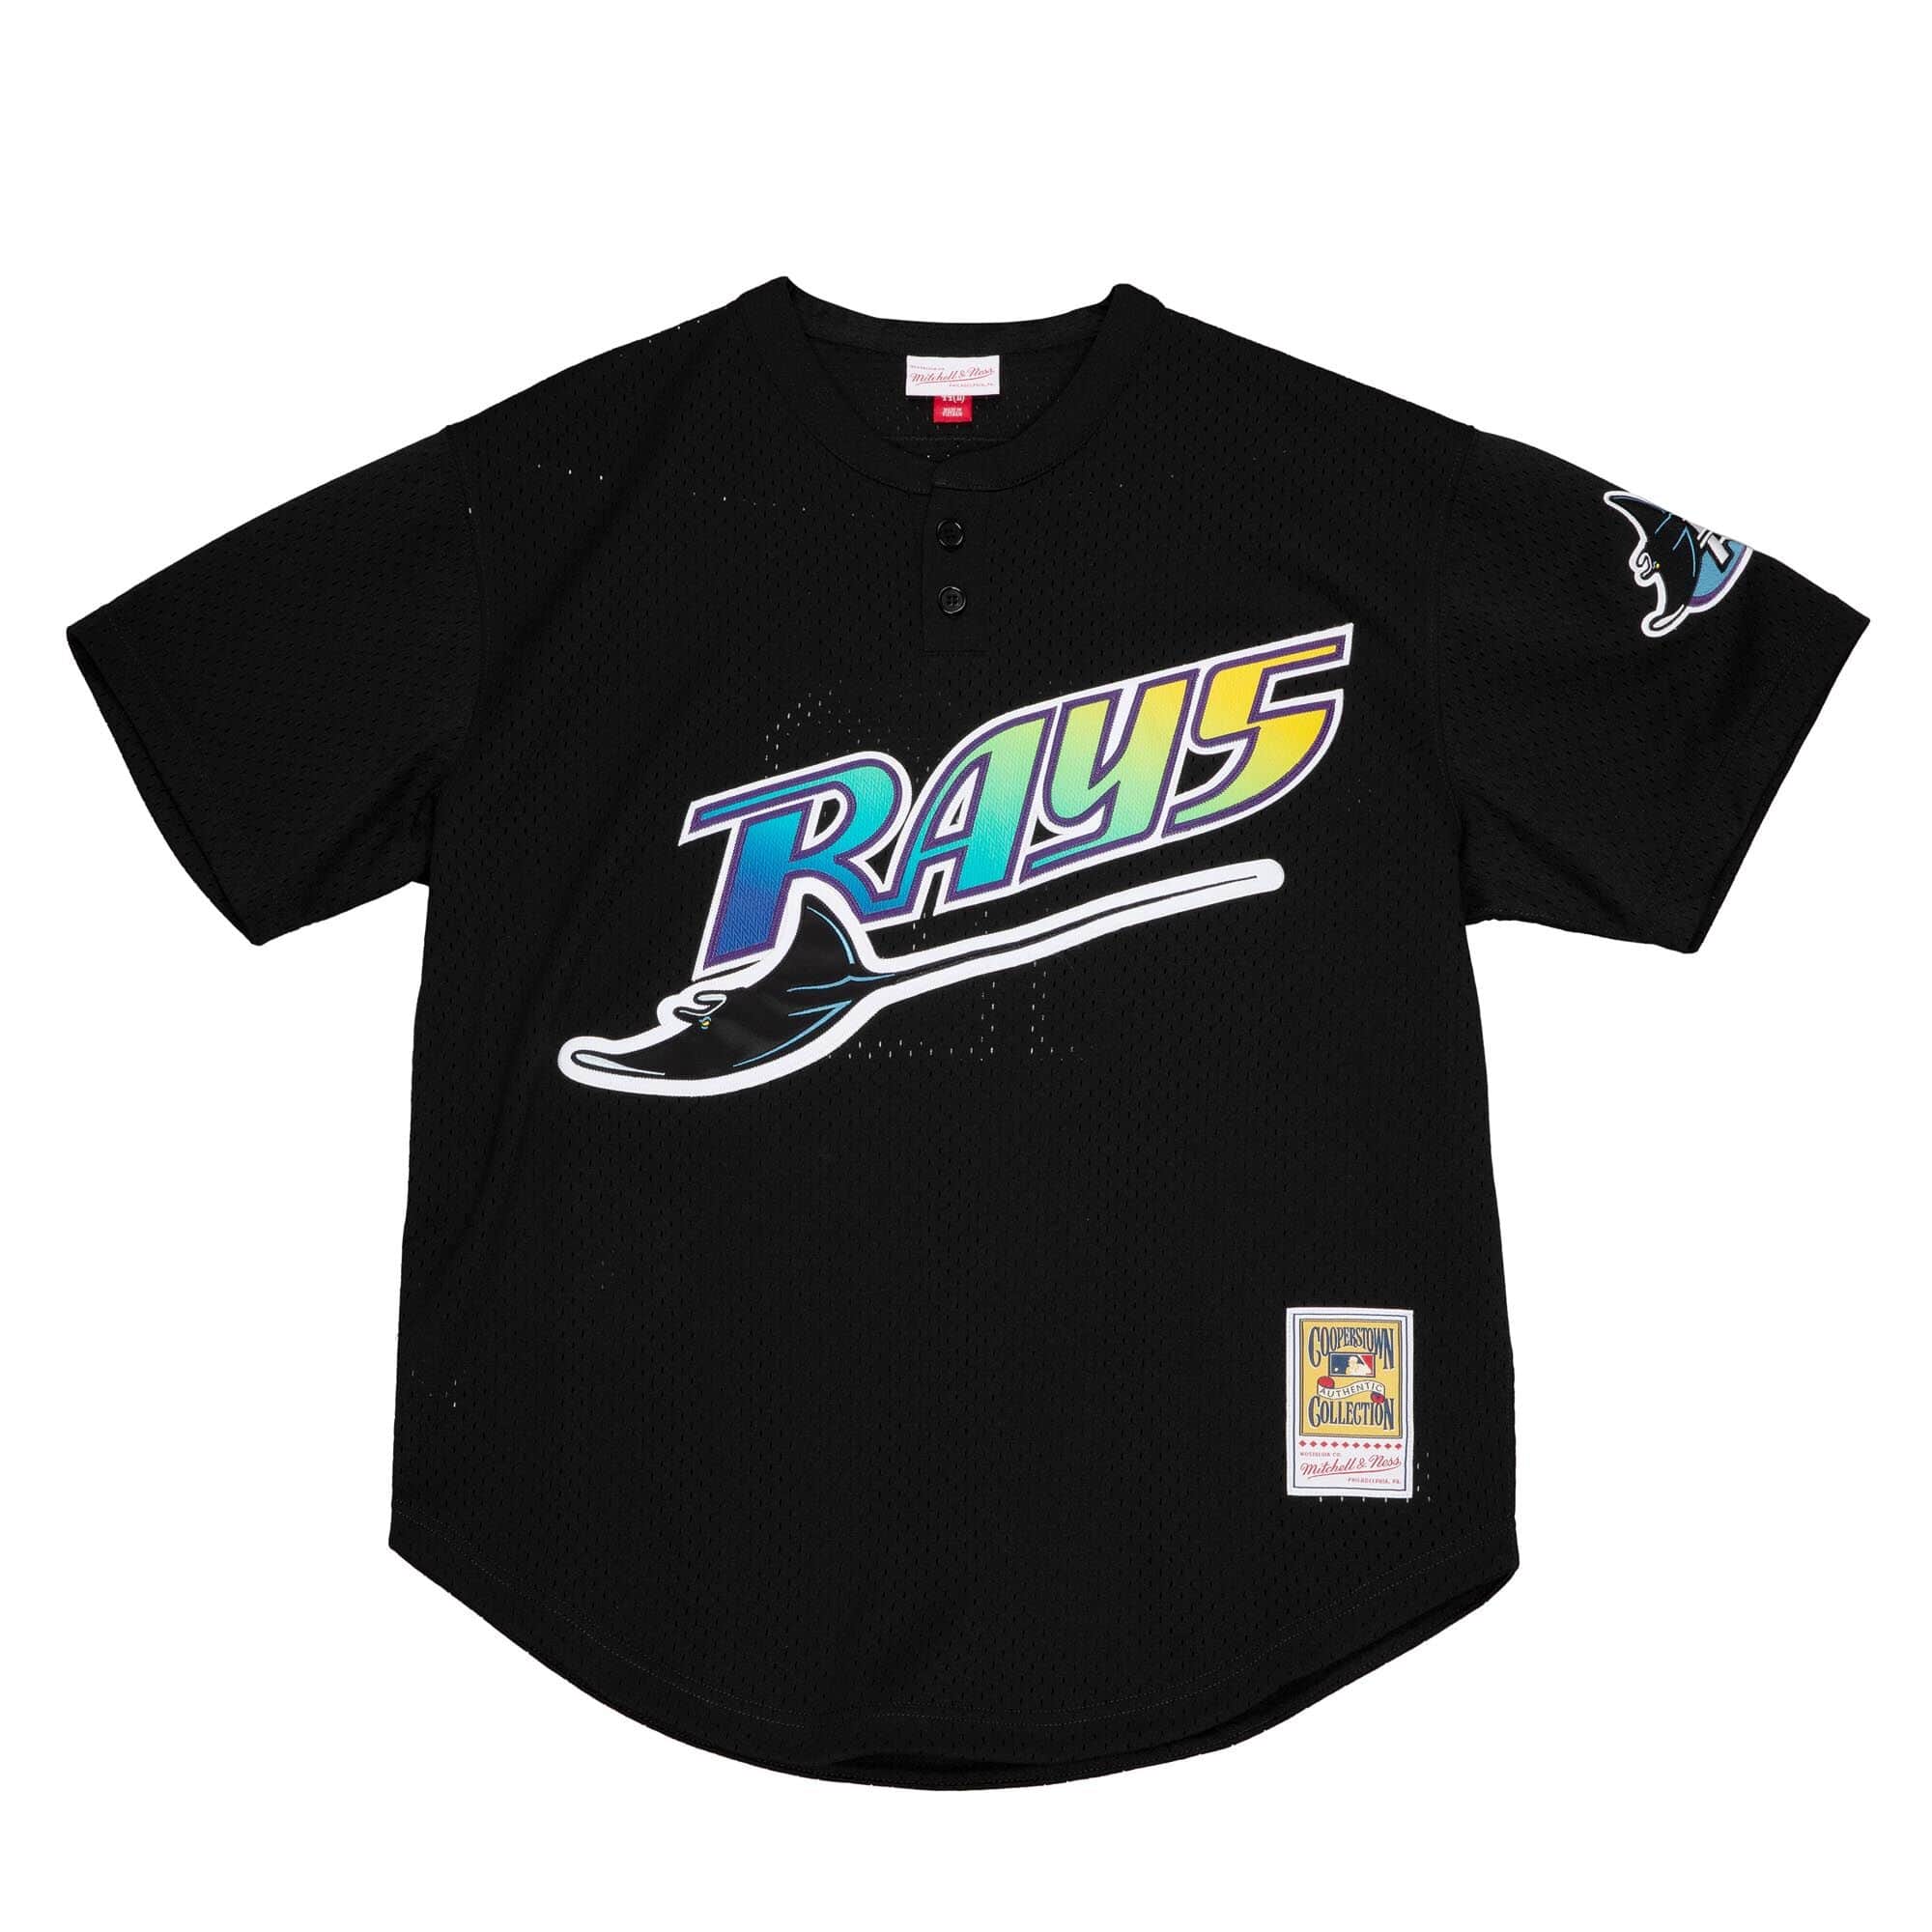 Mitchell & Ness Authentic Mesh BP Jersey Tampa Bay Rays 1998 Wade Boggs